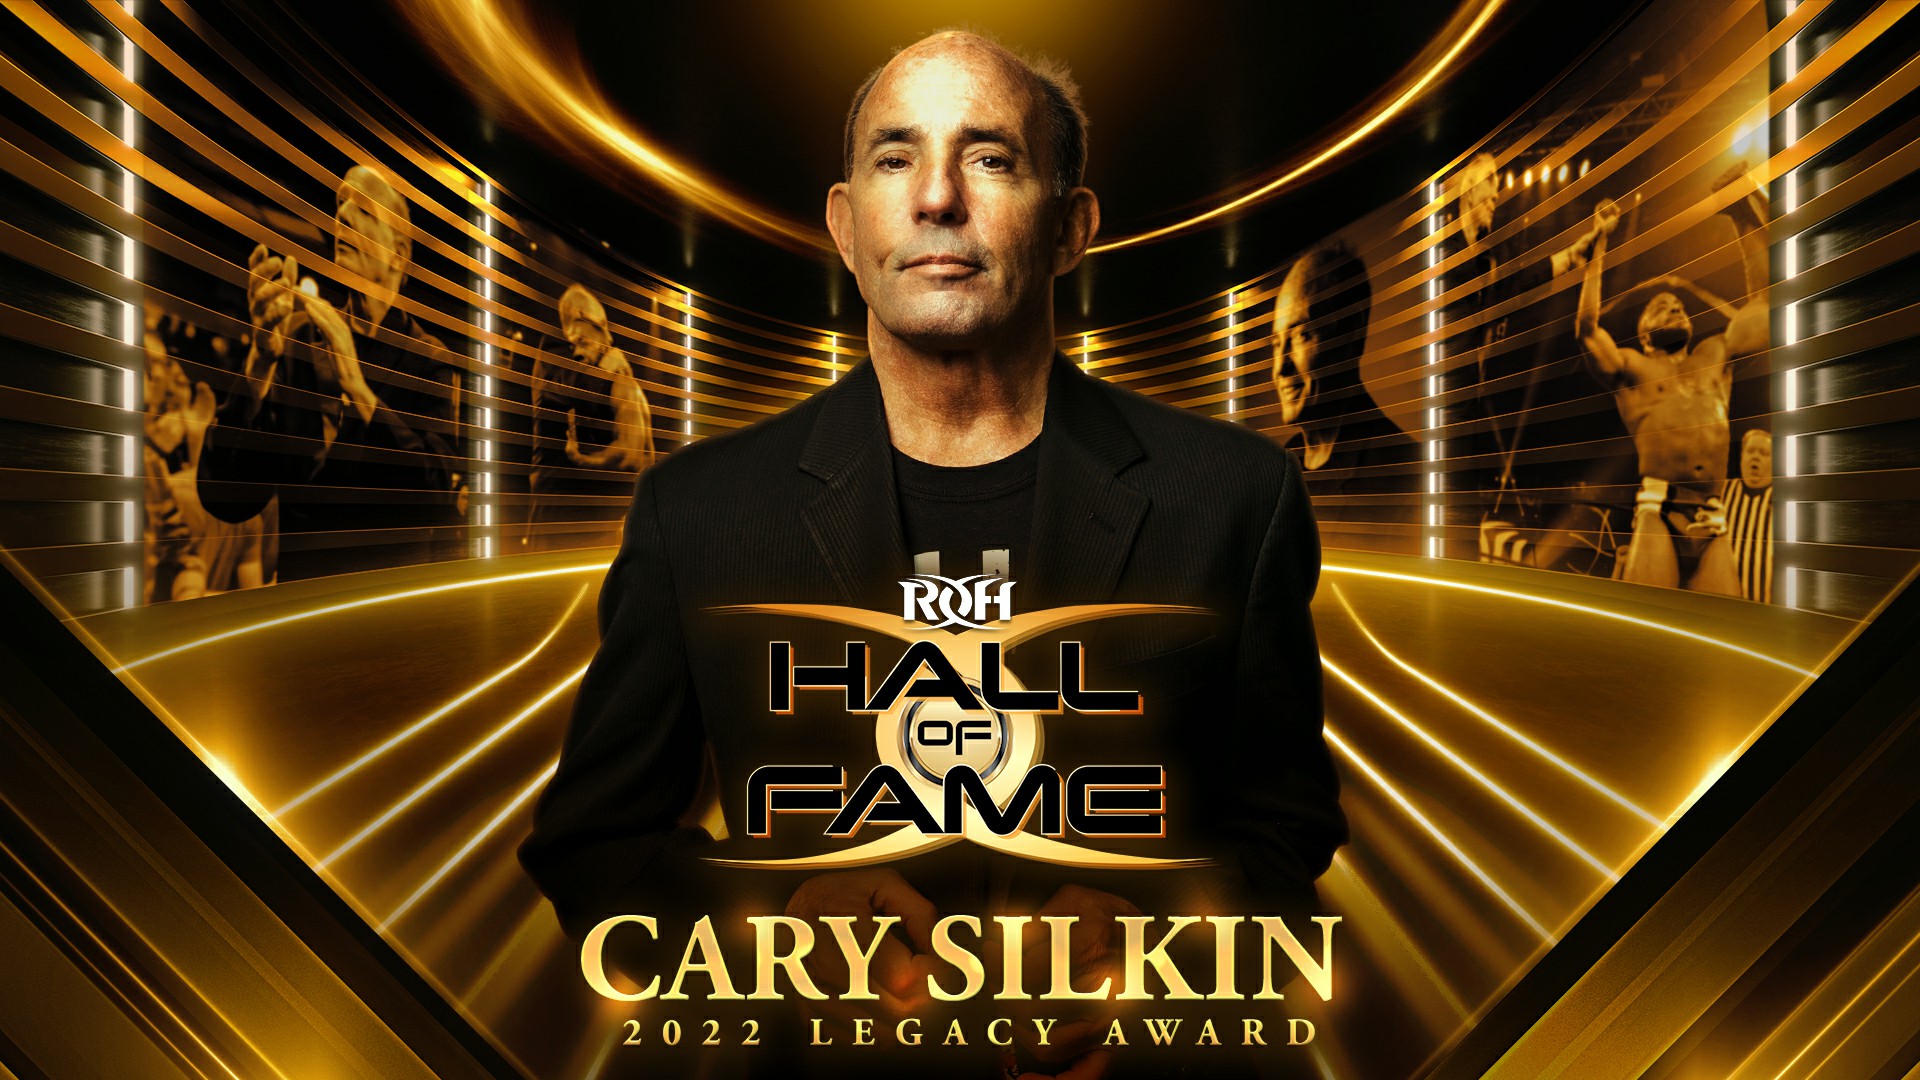 Cary Silkin discusses Chris Jericho becoming ROH World Champion